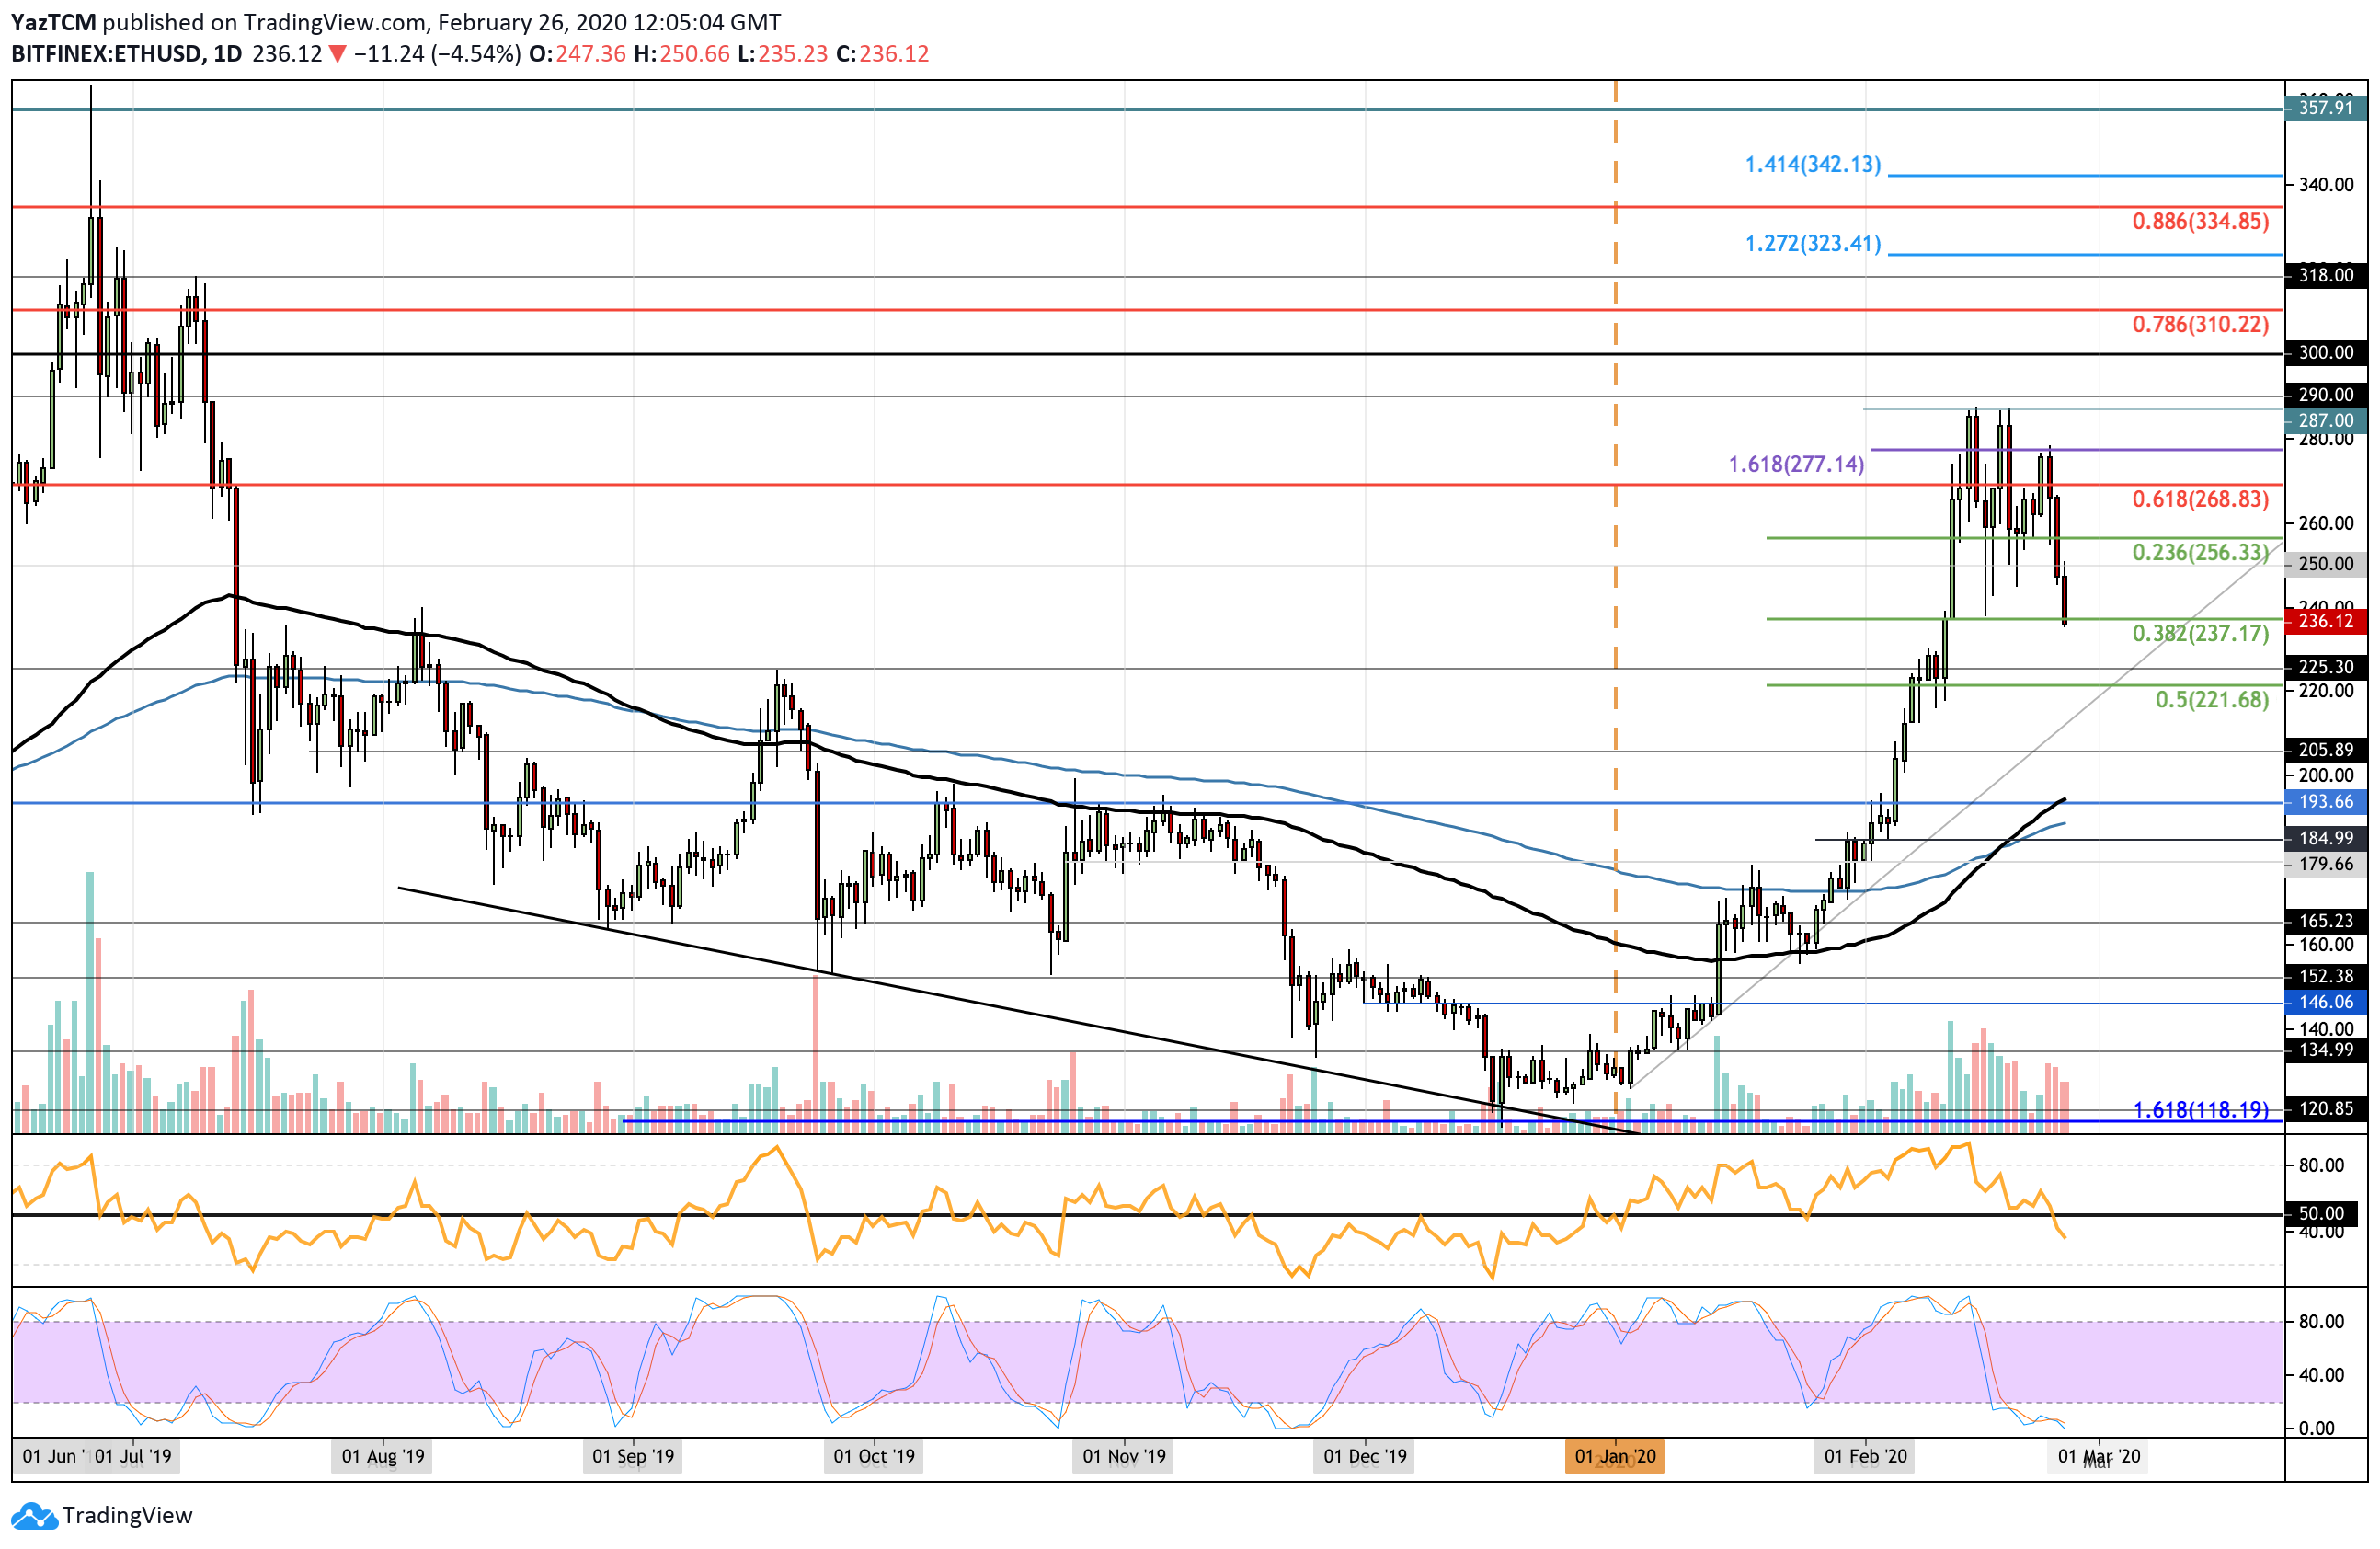 Ethereum Price Analysis: ETH Plunges To $235 As Bears Take Control, How Low Will It Go?